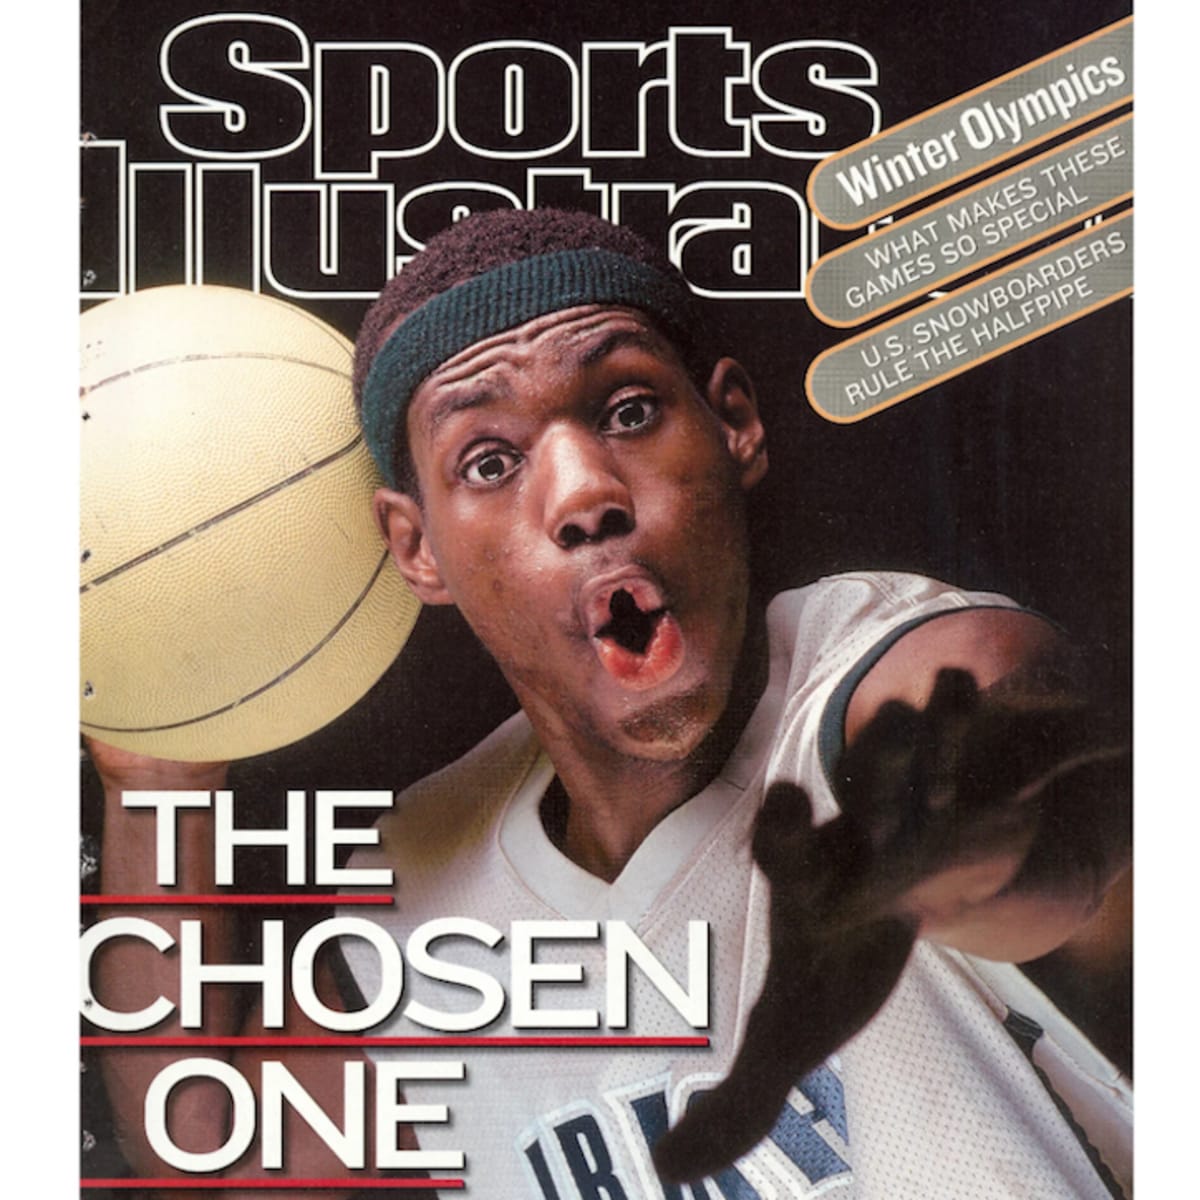 LeBron James' first Sports Illustrated cover jersey hits auction / Blowout  Buzz